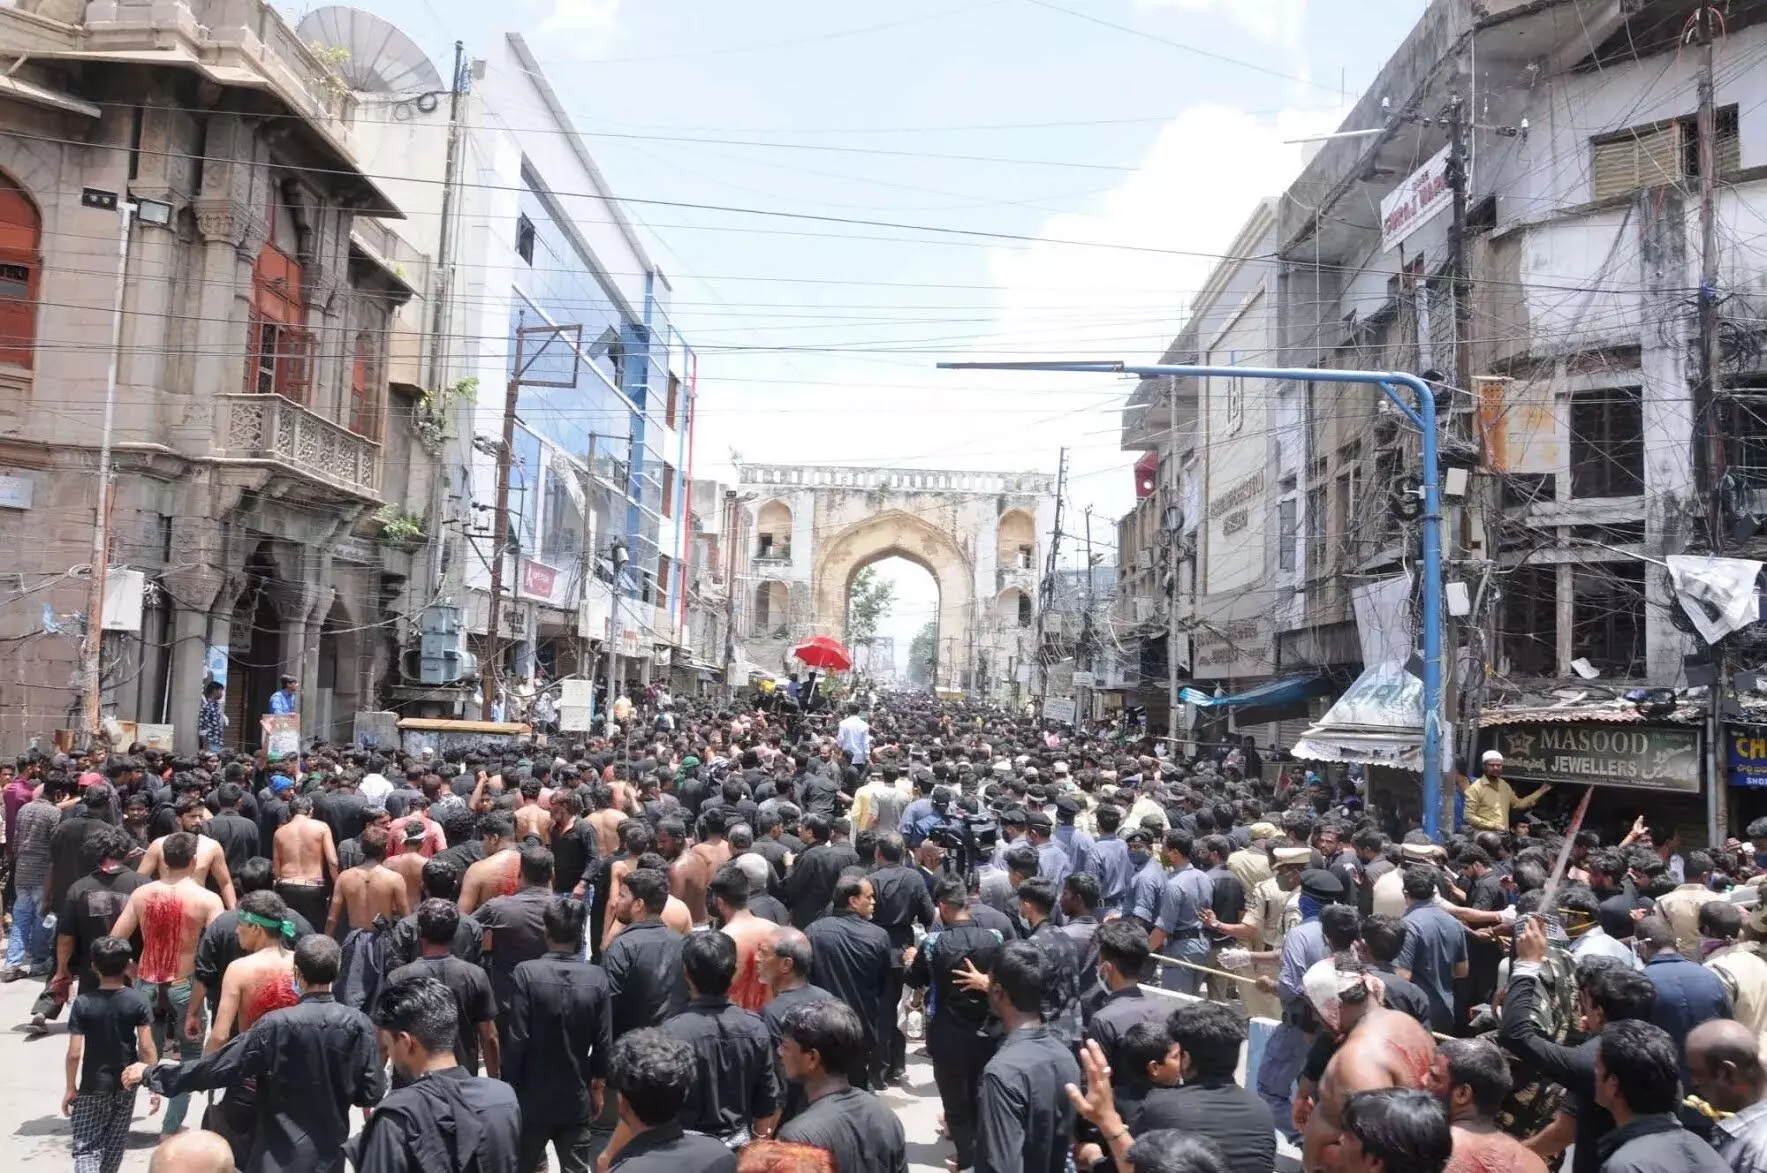 Fire erupts during Muharram procession; Hindu family helps avert disaster